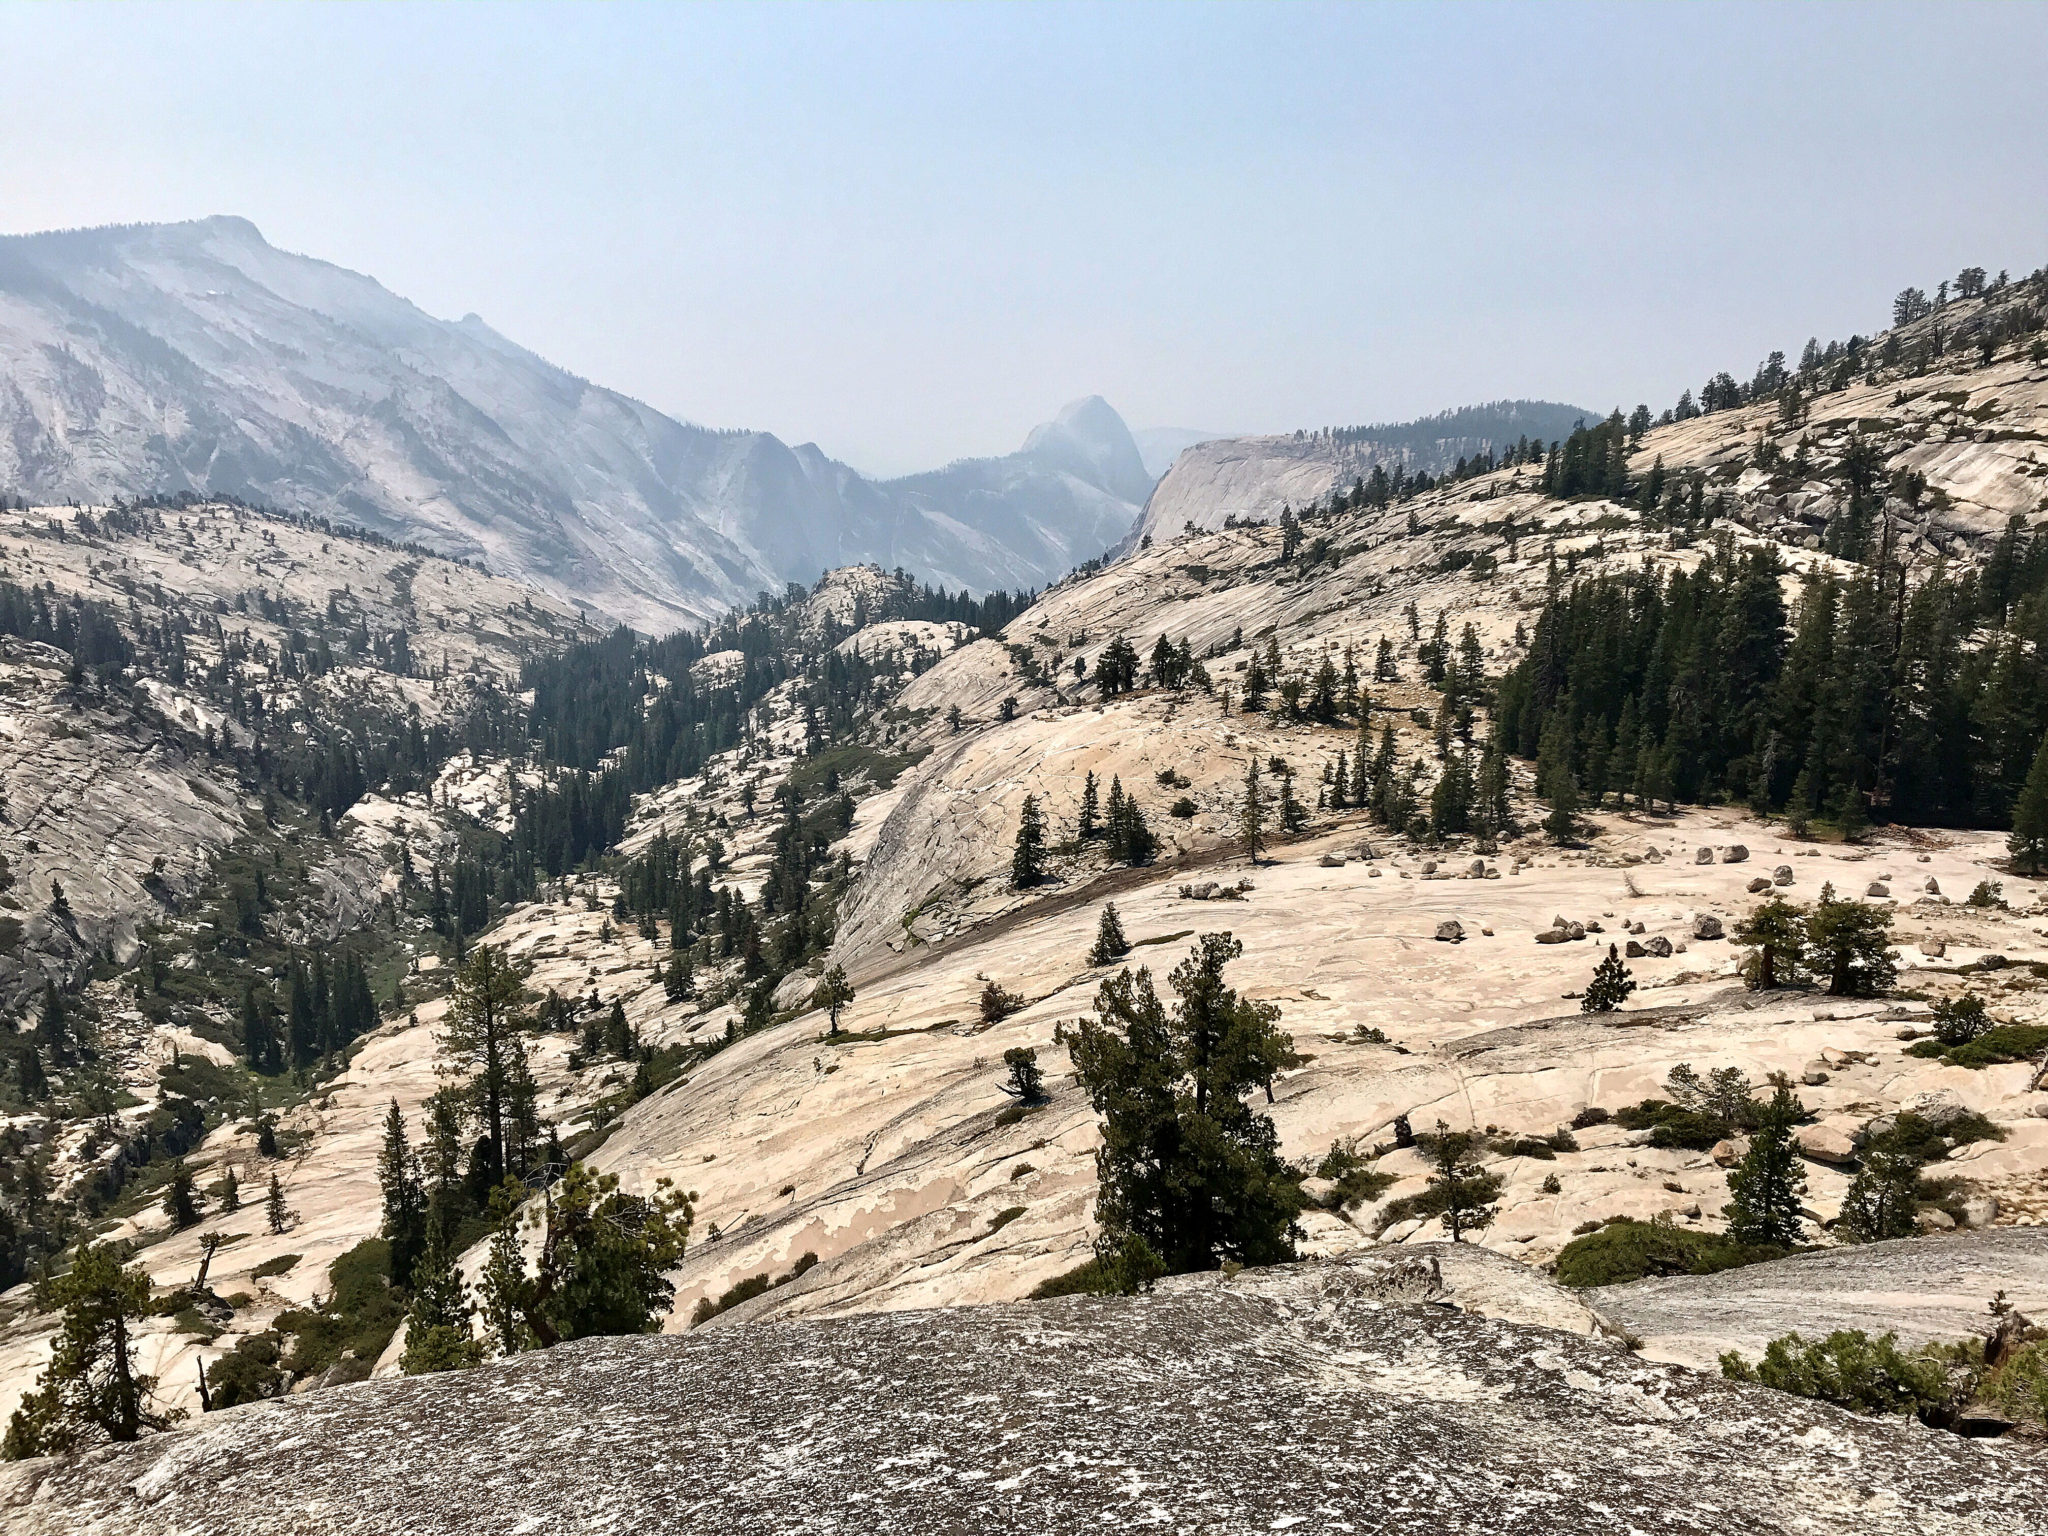 View from Olmsted Point near Tioga Road with the back of Half Dome